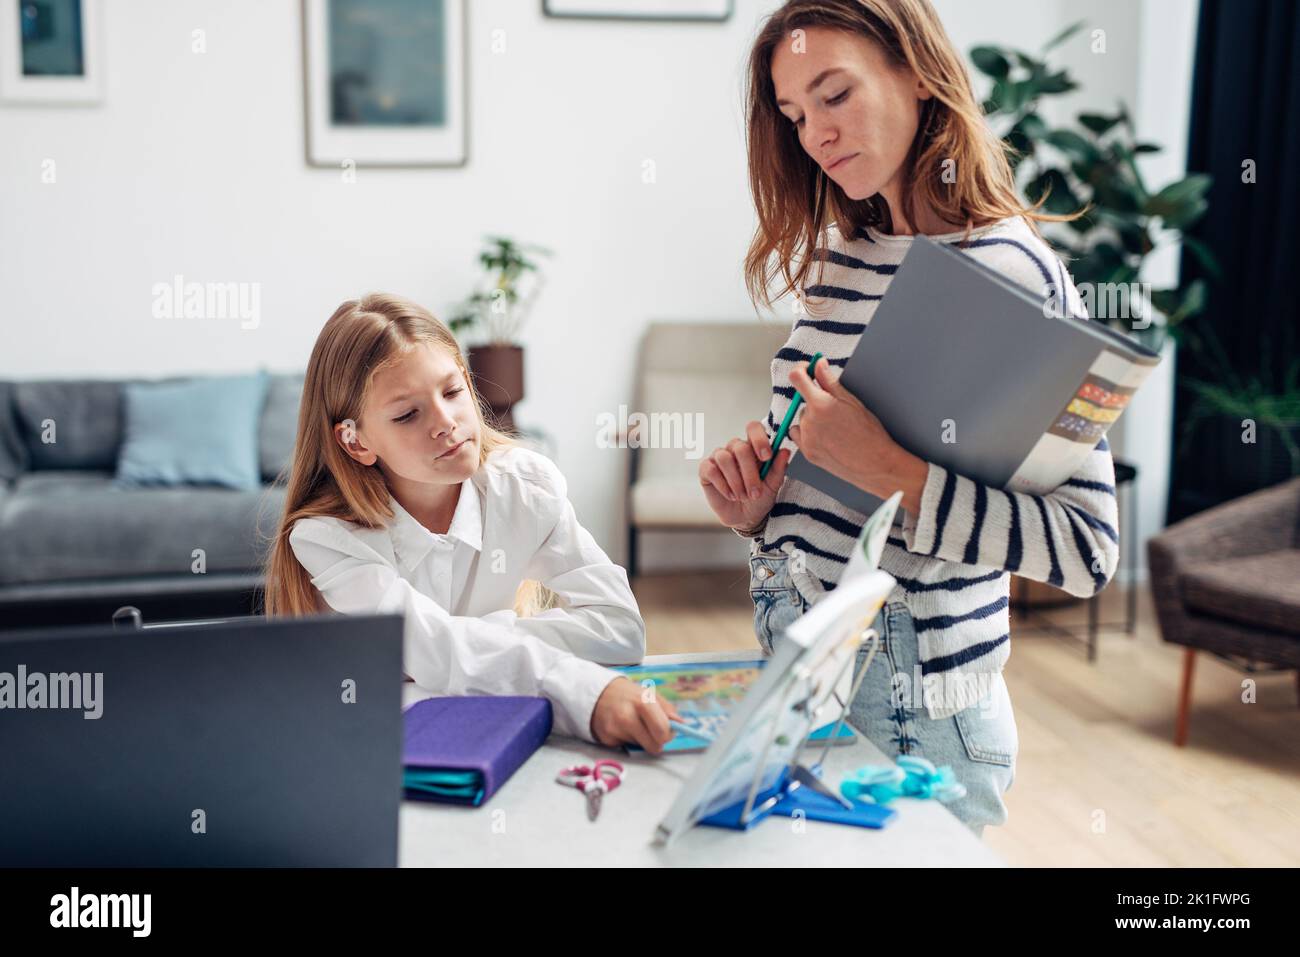 Mother standing next to her daughter doing homework. Stock Photo